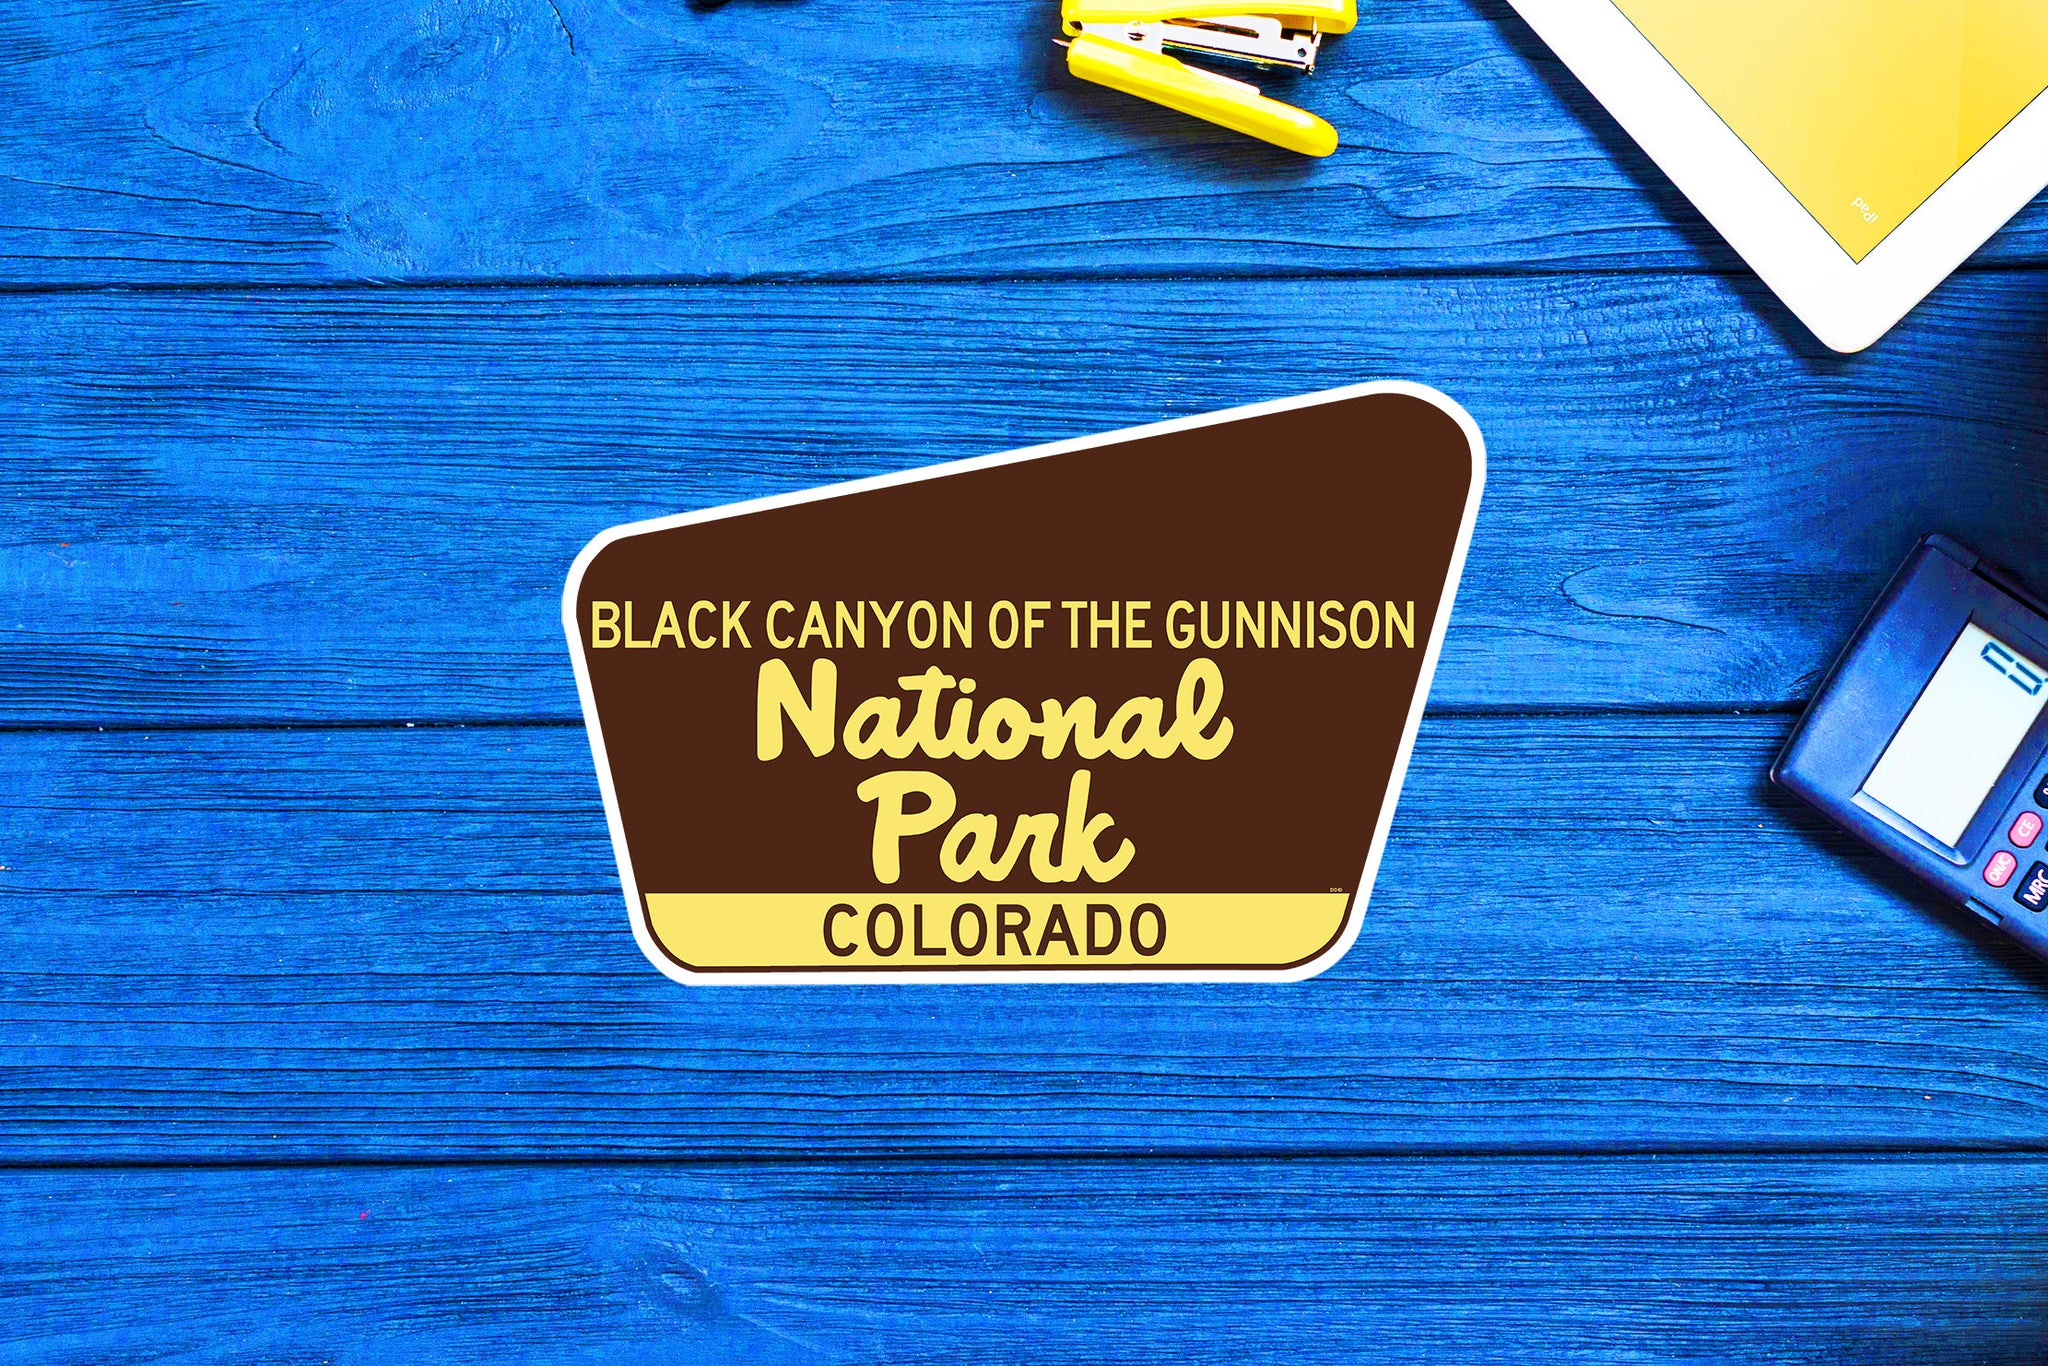 Black Canyon of the Gunnison Forest National Park California Travel Sticker Decal 3.75" Vinyl